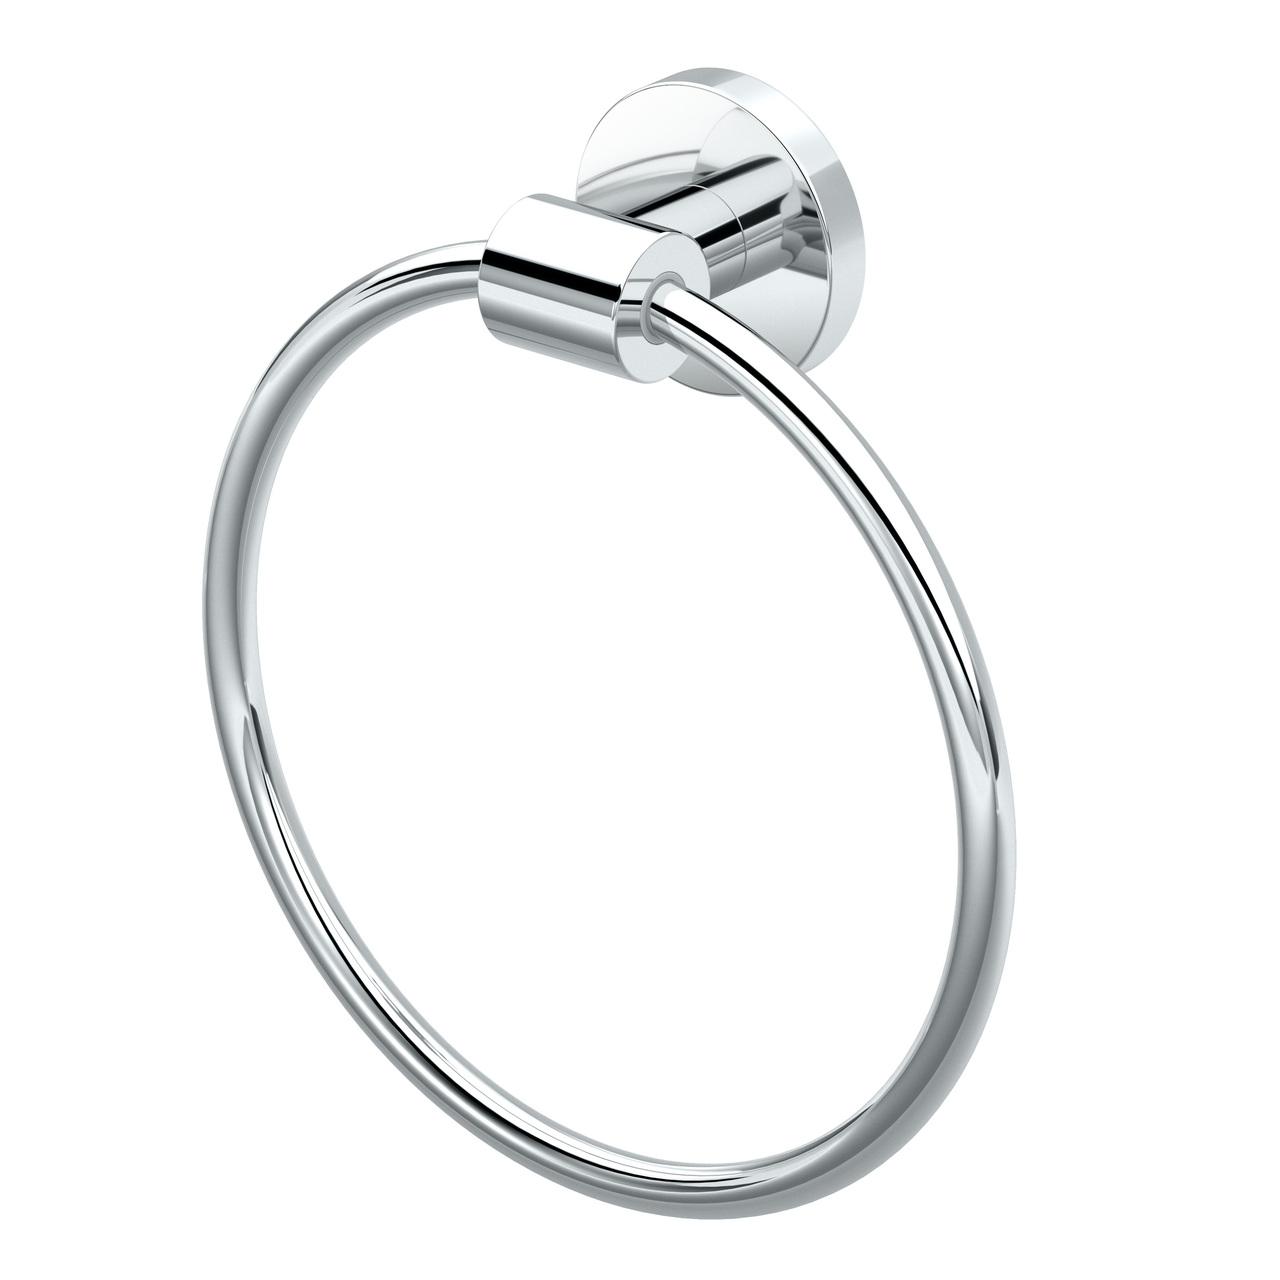 Reveal 6-5/8" Towel Ring in Chrome